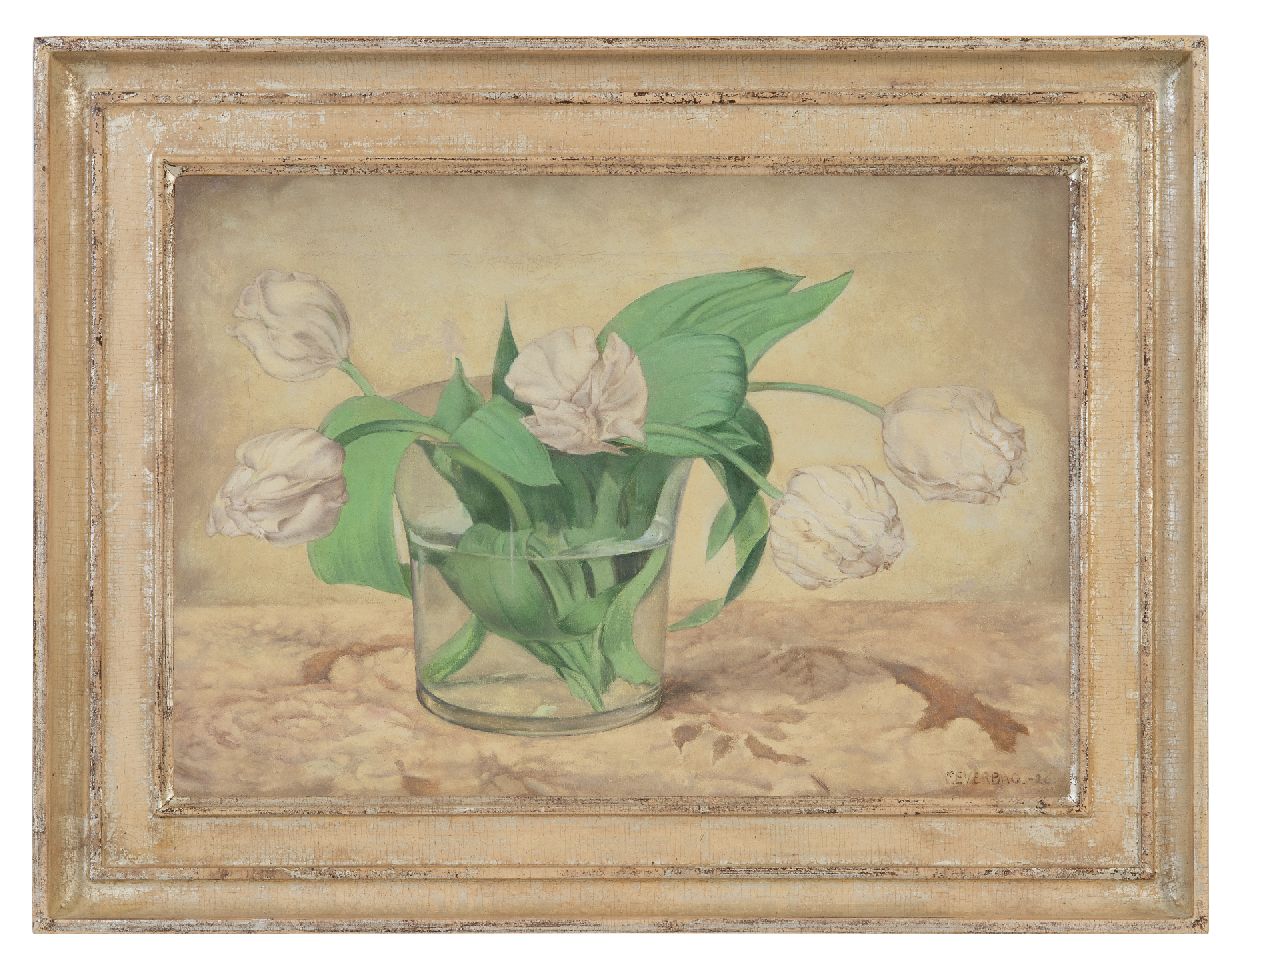 Everbag F.  | Franciscus 'Frans' Everbag | Paintings offered for sale | White tulips in a glass vase, oil on canvas 23.5 x 33.4 cm, signed l.r. and dated '26